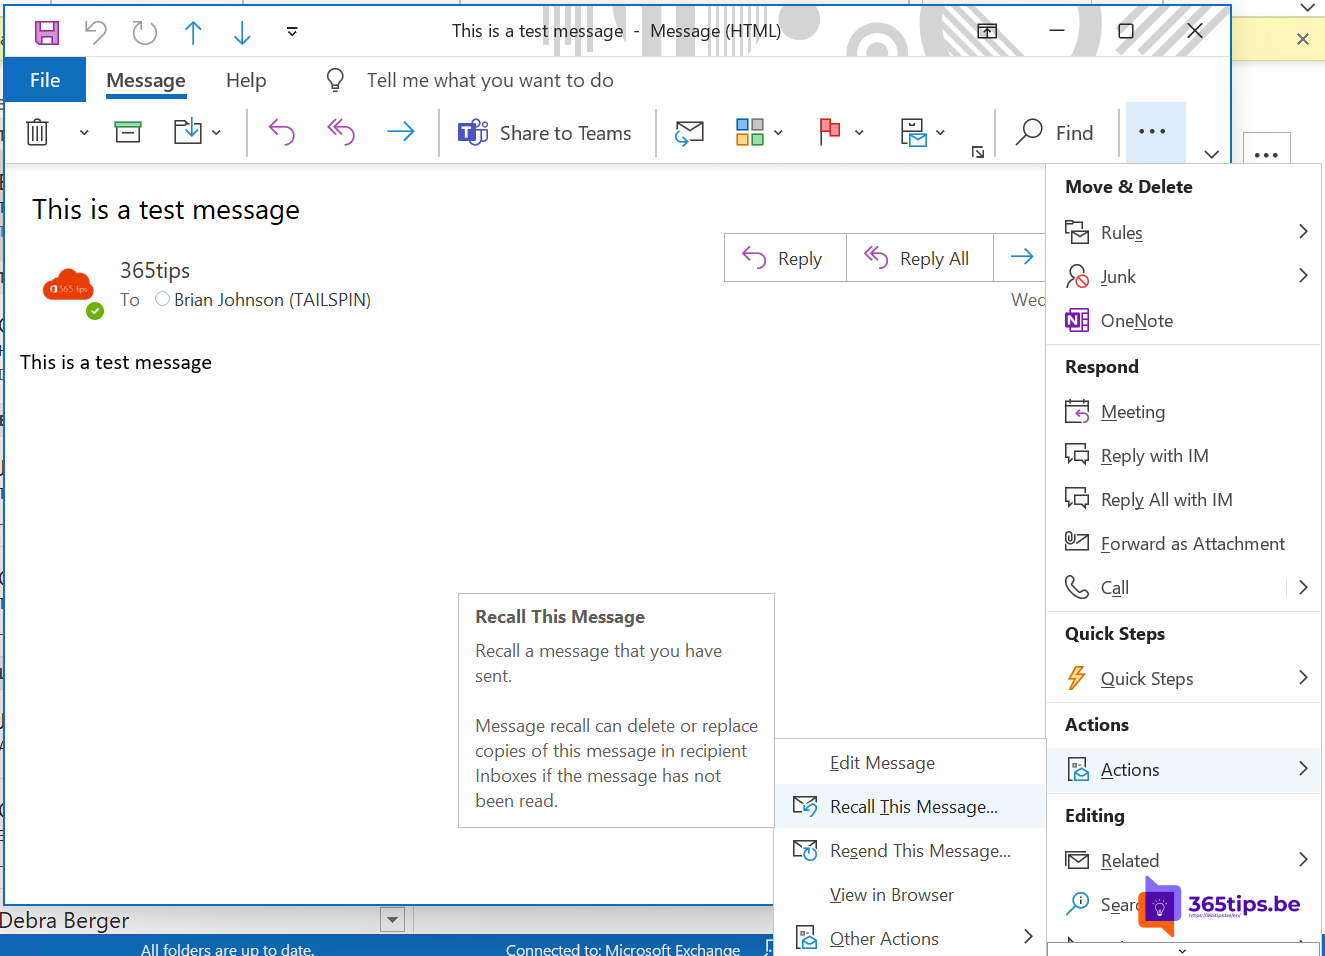 📩 Outlook: How to retrieve or replace an email message you sent (Recall)